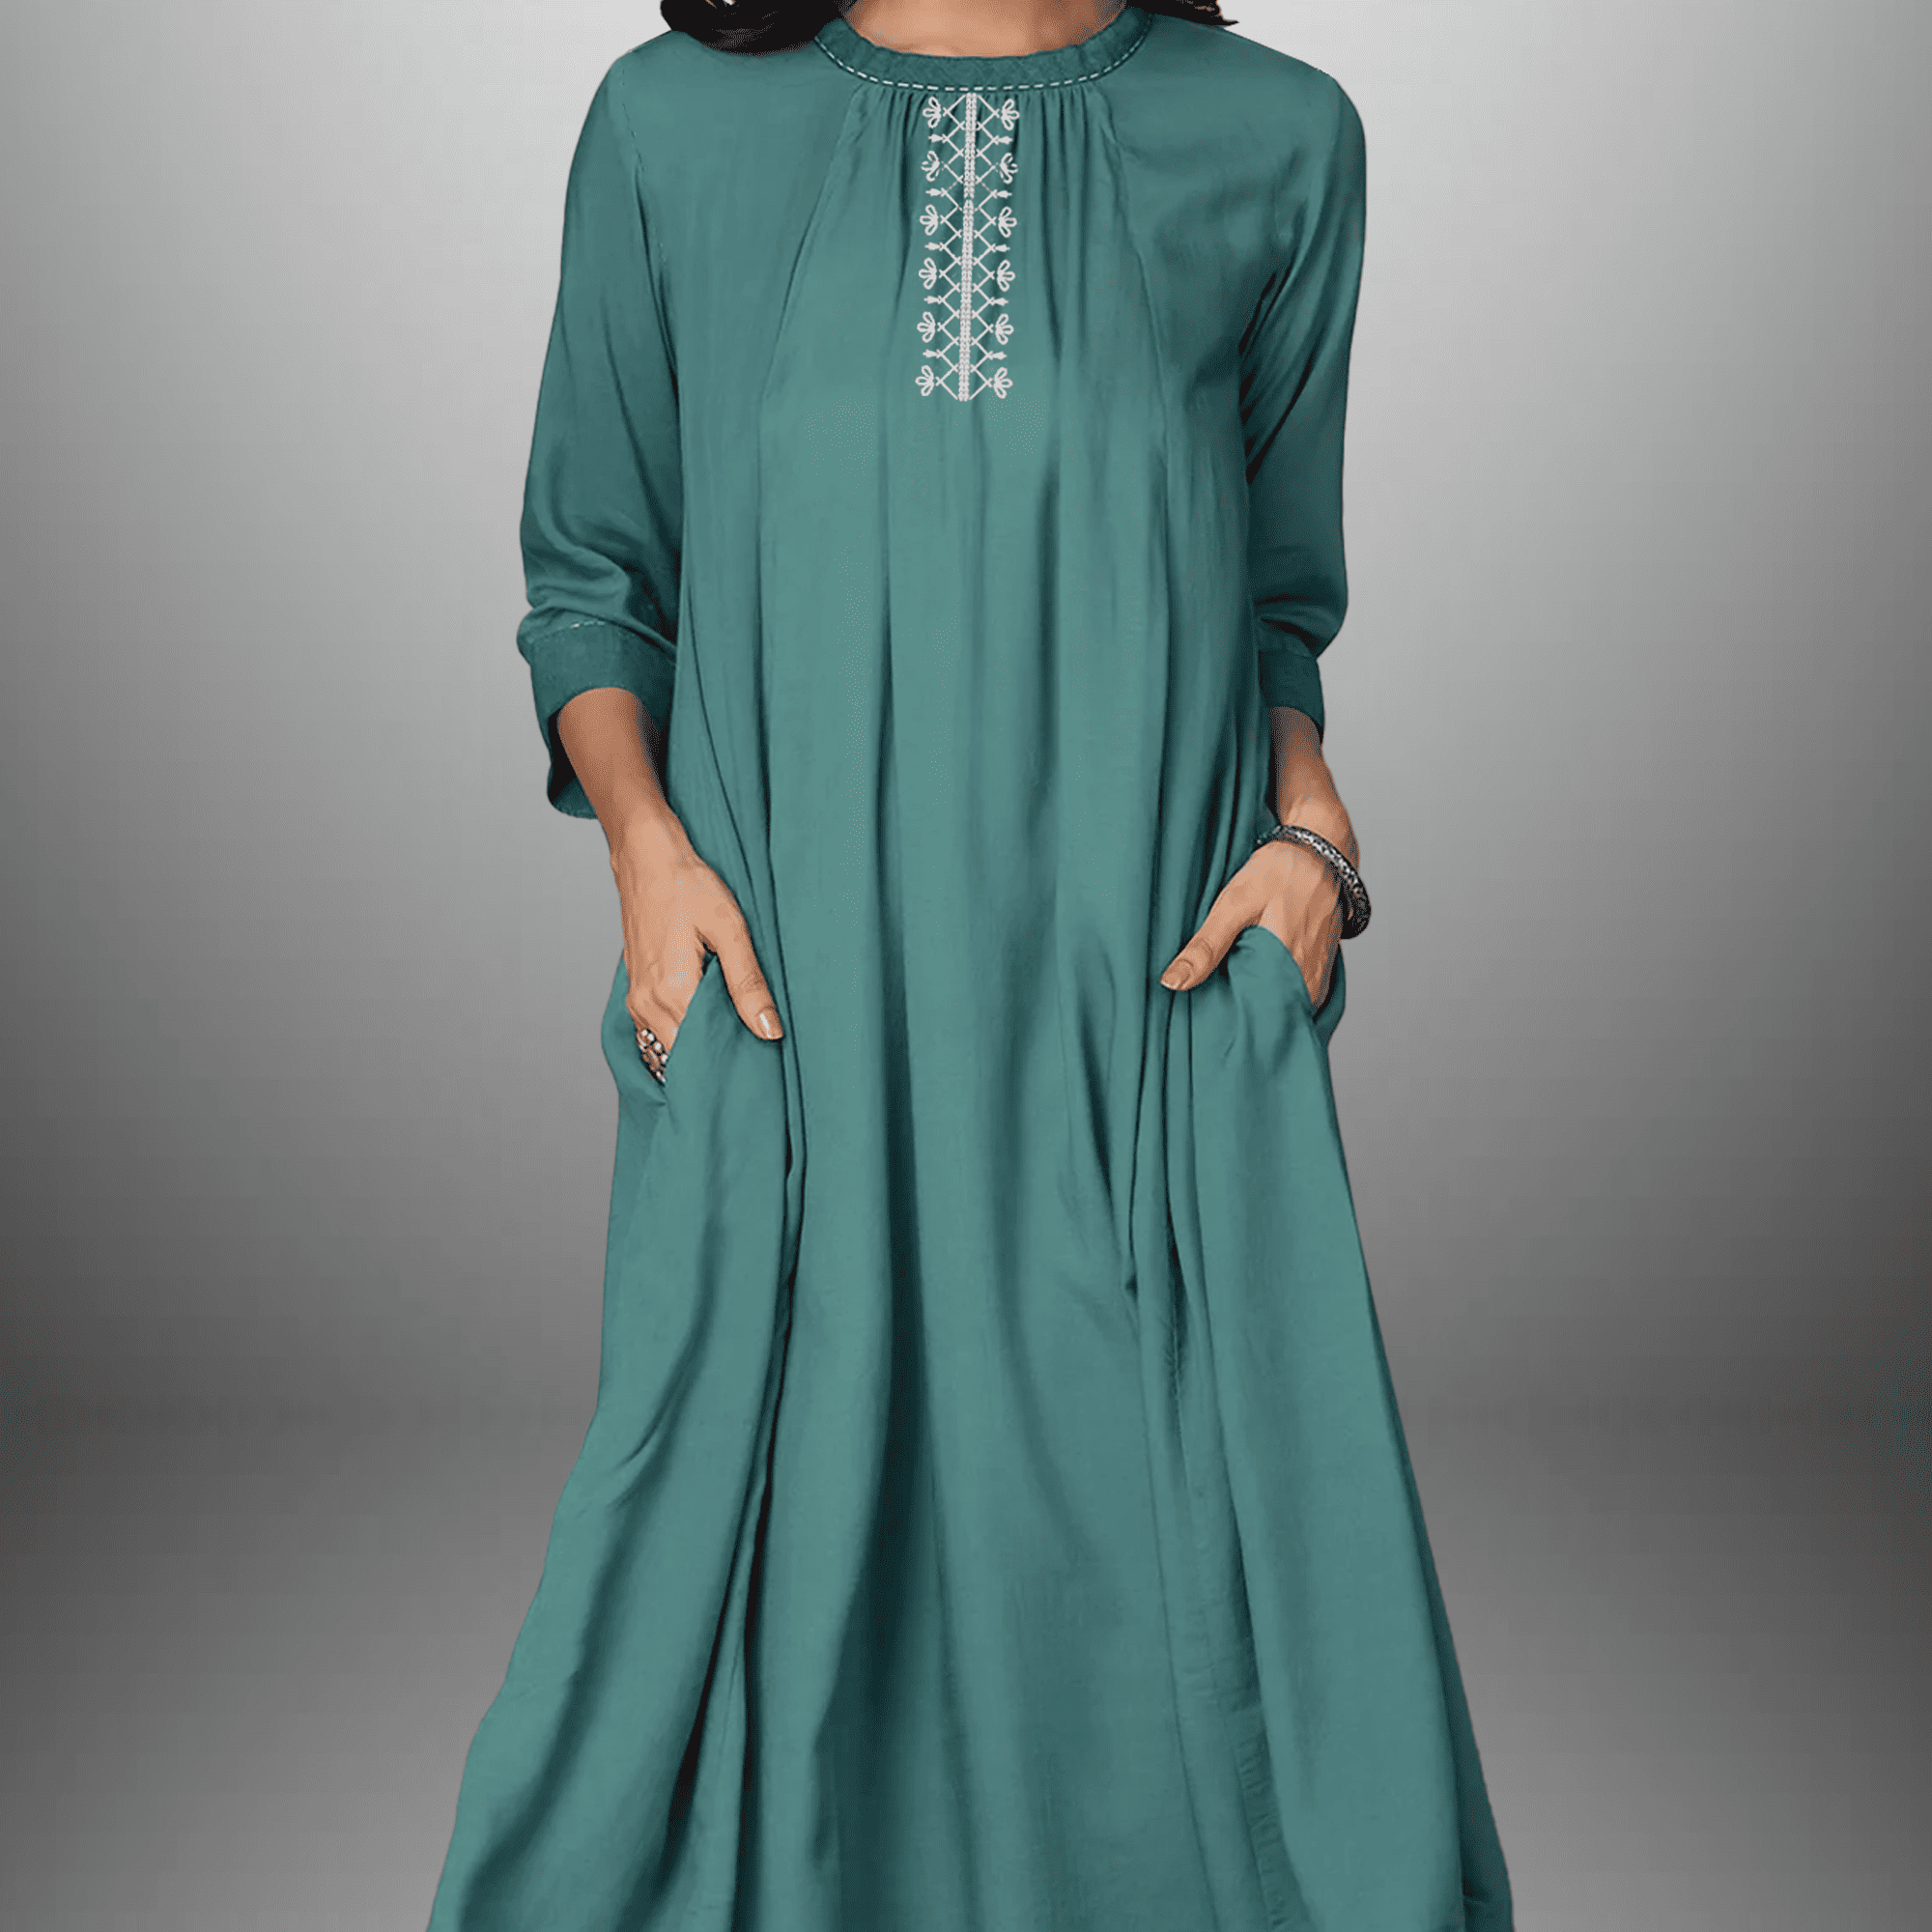 Women's Blue Yoke design Kurti with embroidery work and pockets with Bottom-RWKS081